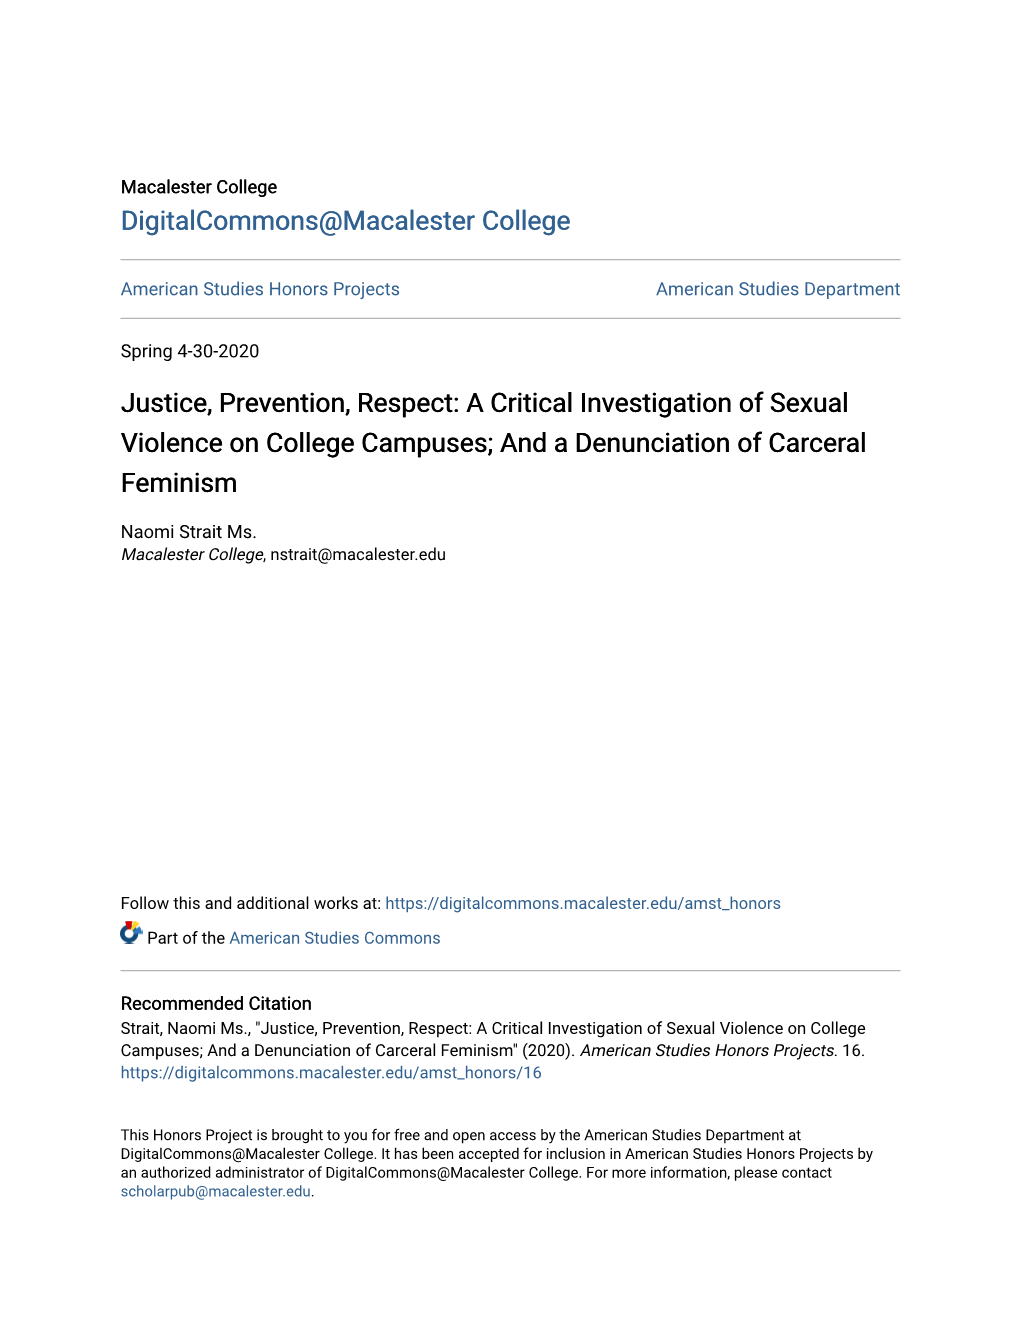 Justice, Prevention, Respect: a Critical Investigation of Sexual Violence on College Campuses; and a Denunciation of Carceral Feminism